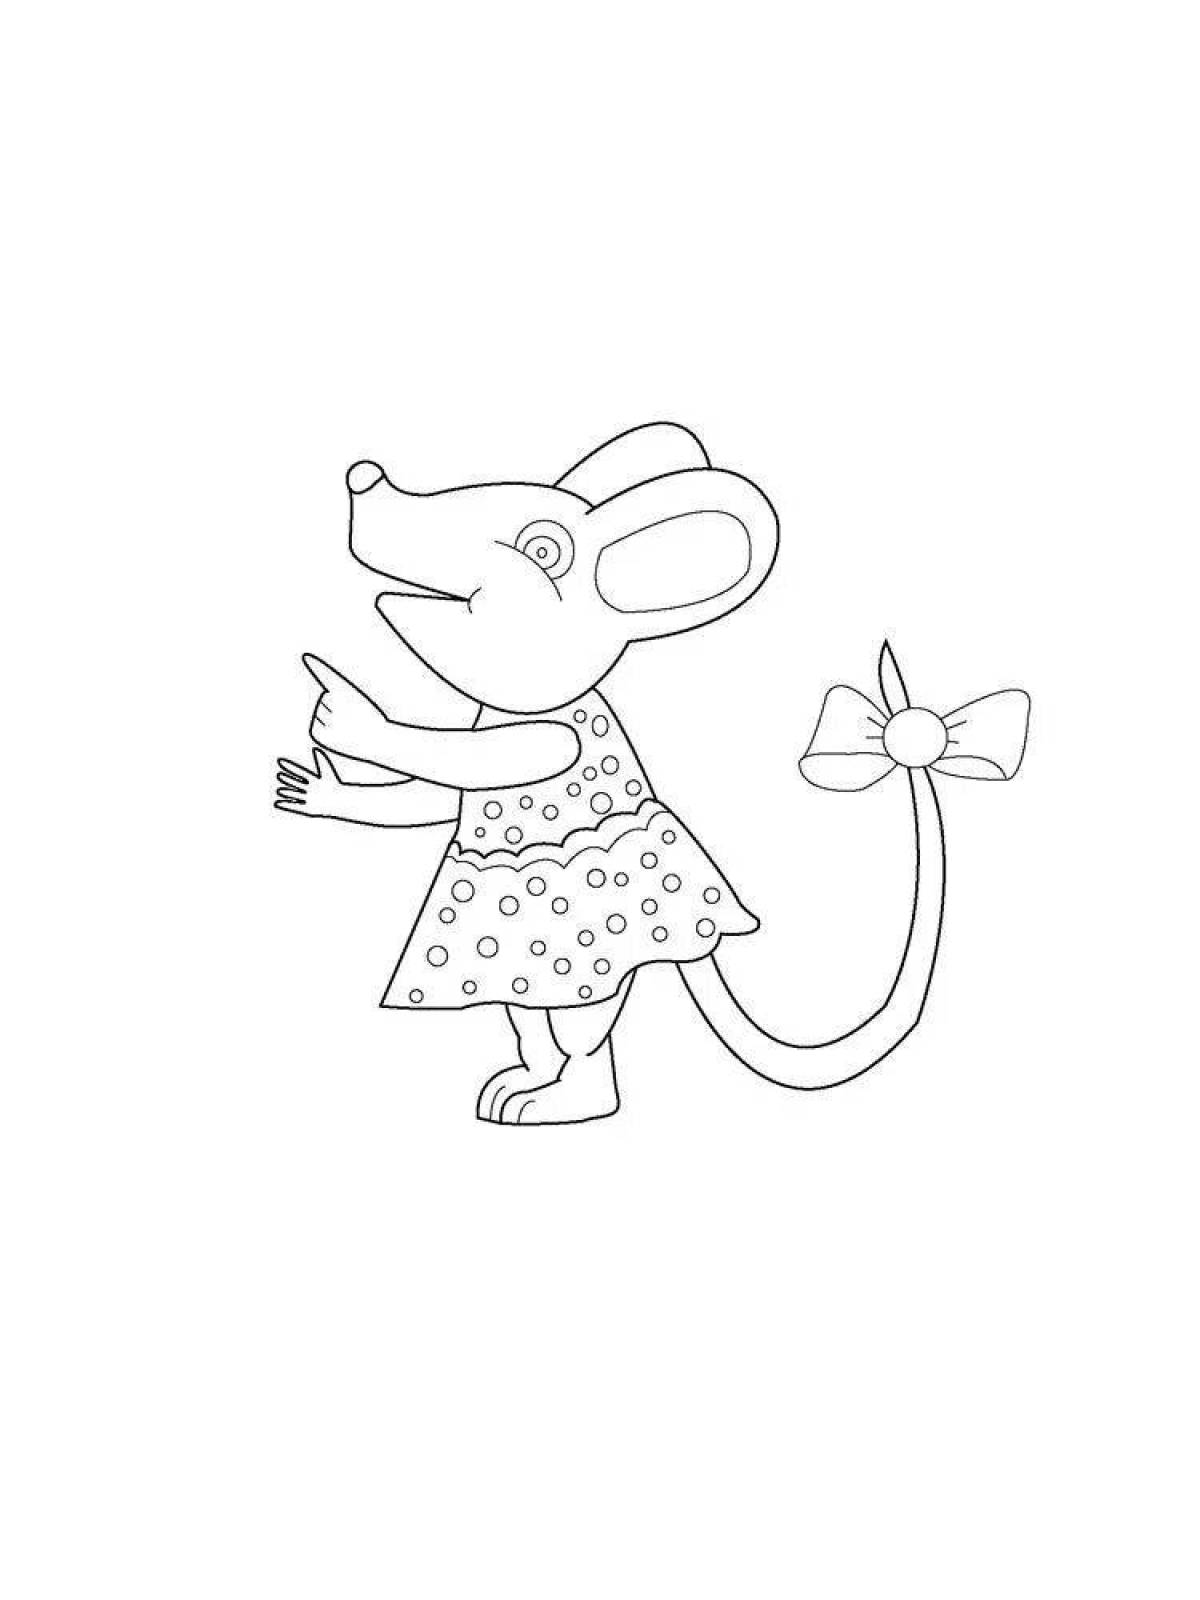 Coloring book glowing mouse norushka